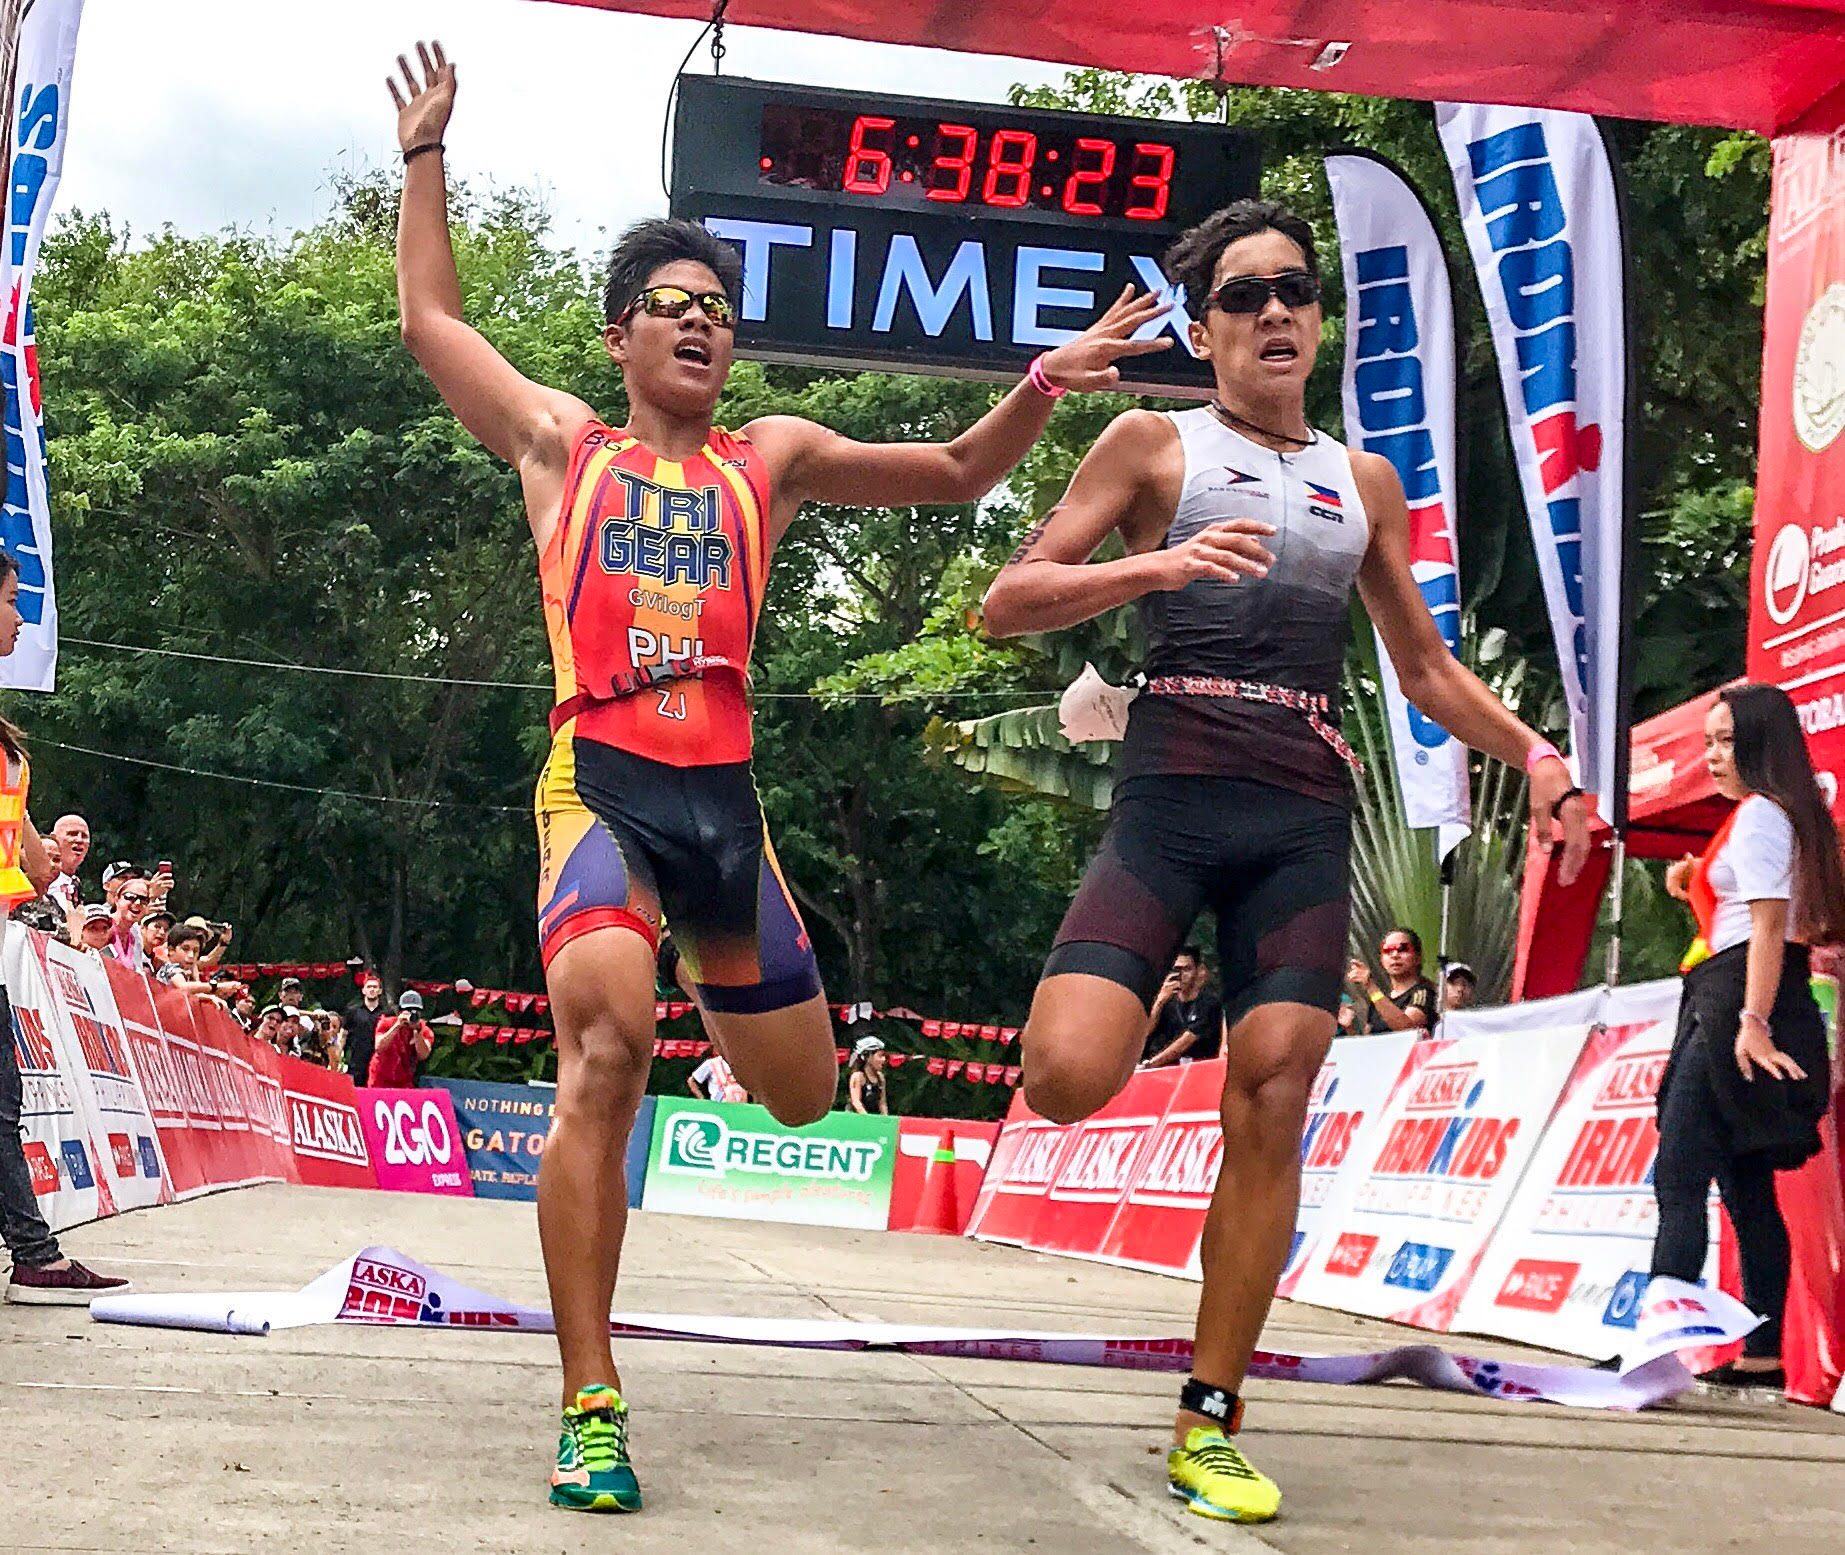 2018 Ironkids: Borja nips Pusing by fraction of a second